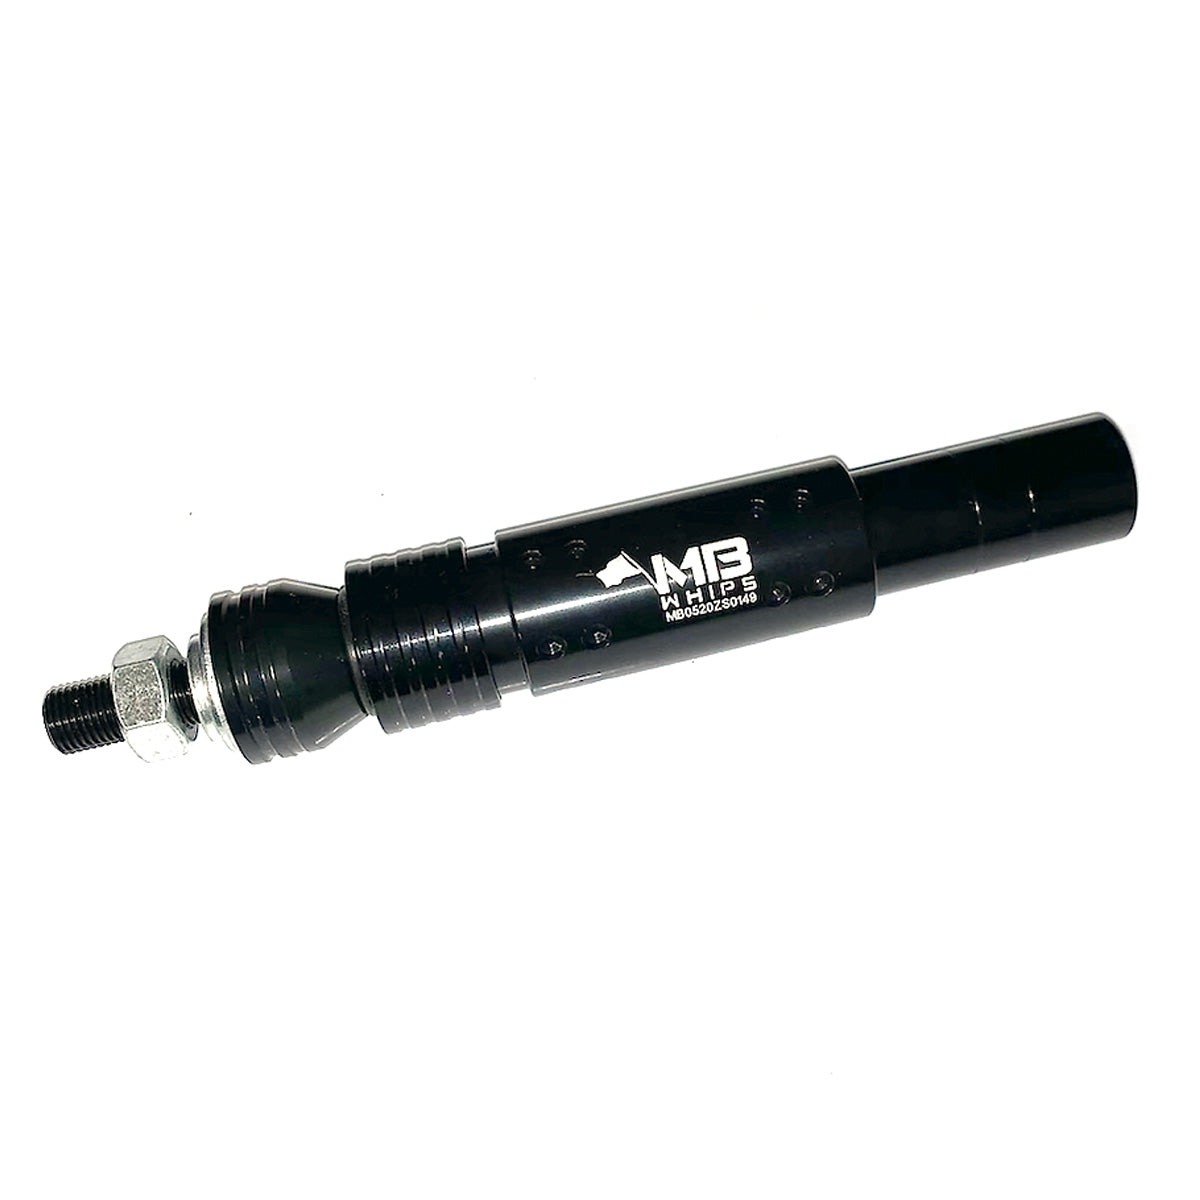 A black 1/2” UTV Flag Pole Base with Quick Release from MB Whips. The image displays the cylindrical base with the MB Whips logo engraved, along with the quick-release attachment mechanism featuring a threaded end for secure mounting. The product showcases a sleek, durable design intended for easy flag pole installation and removal.